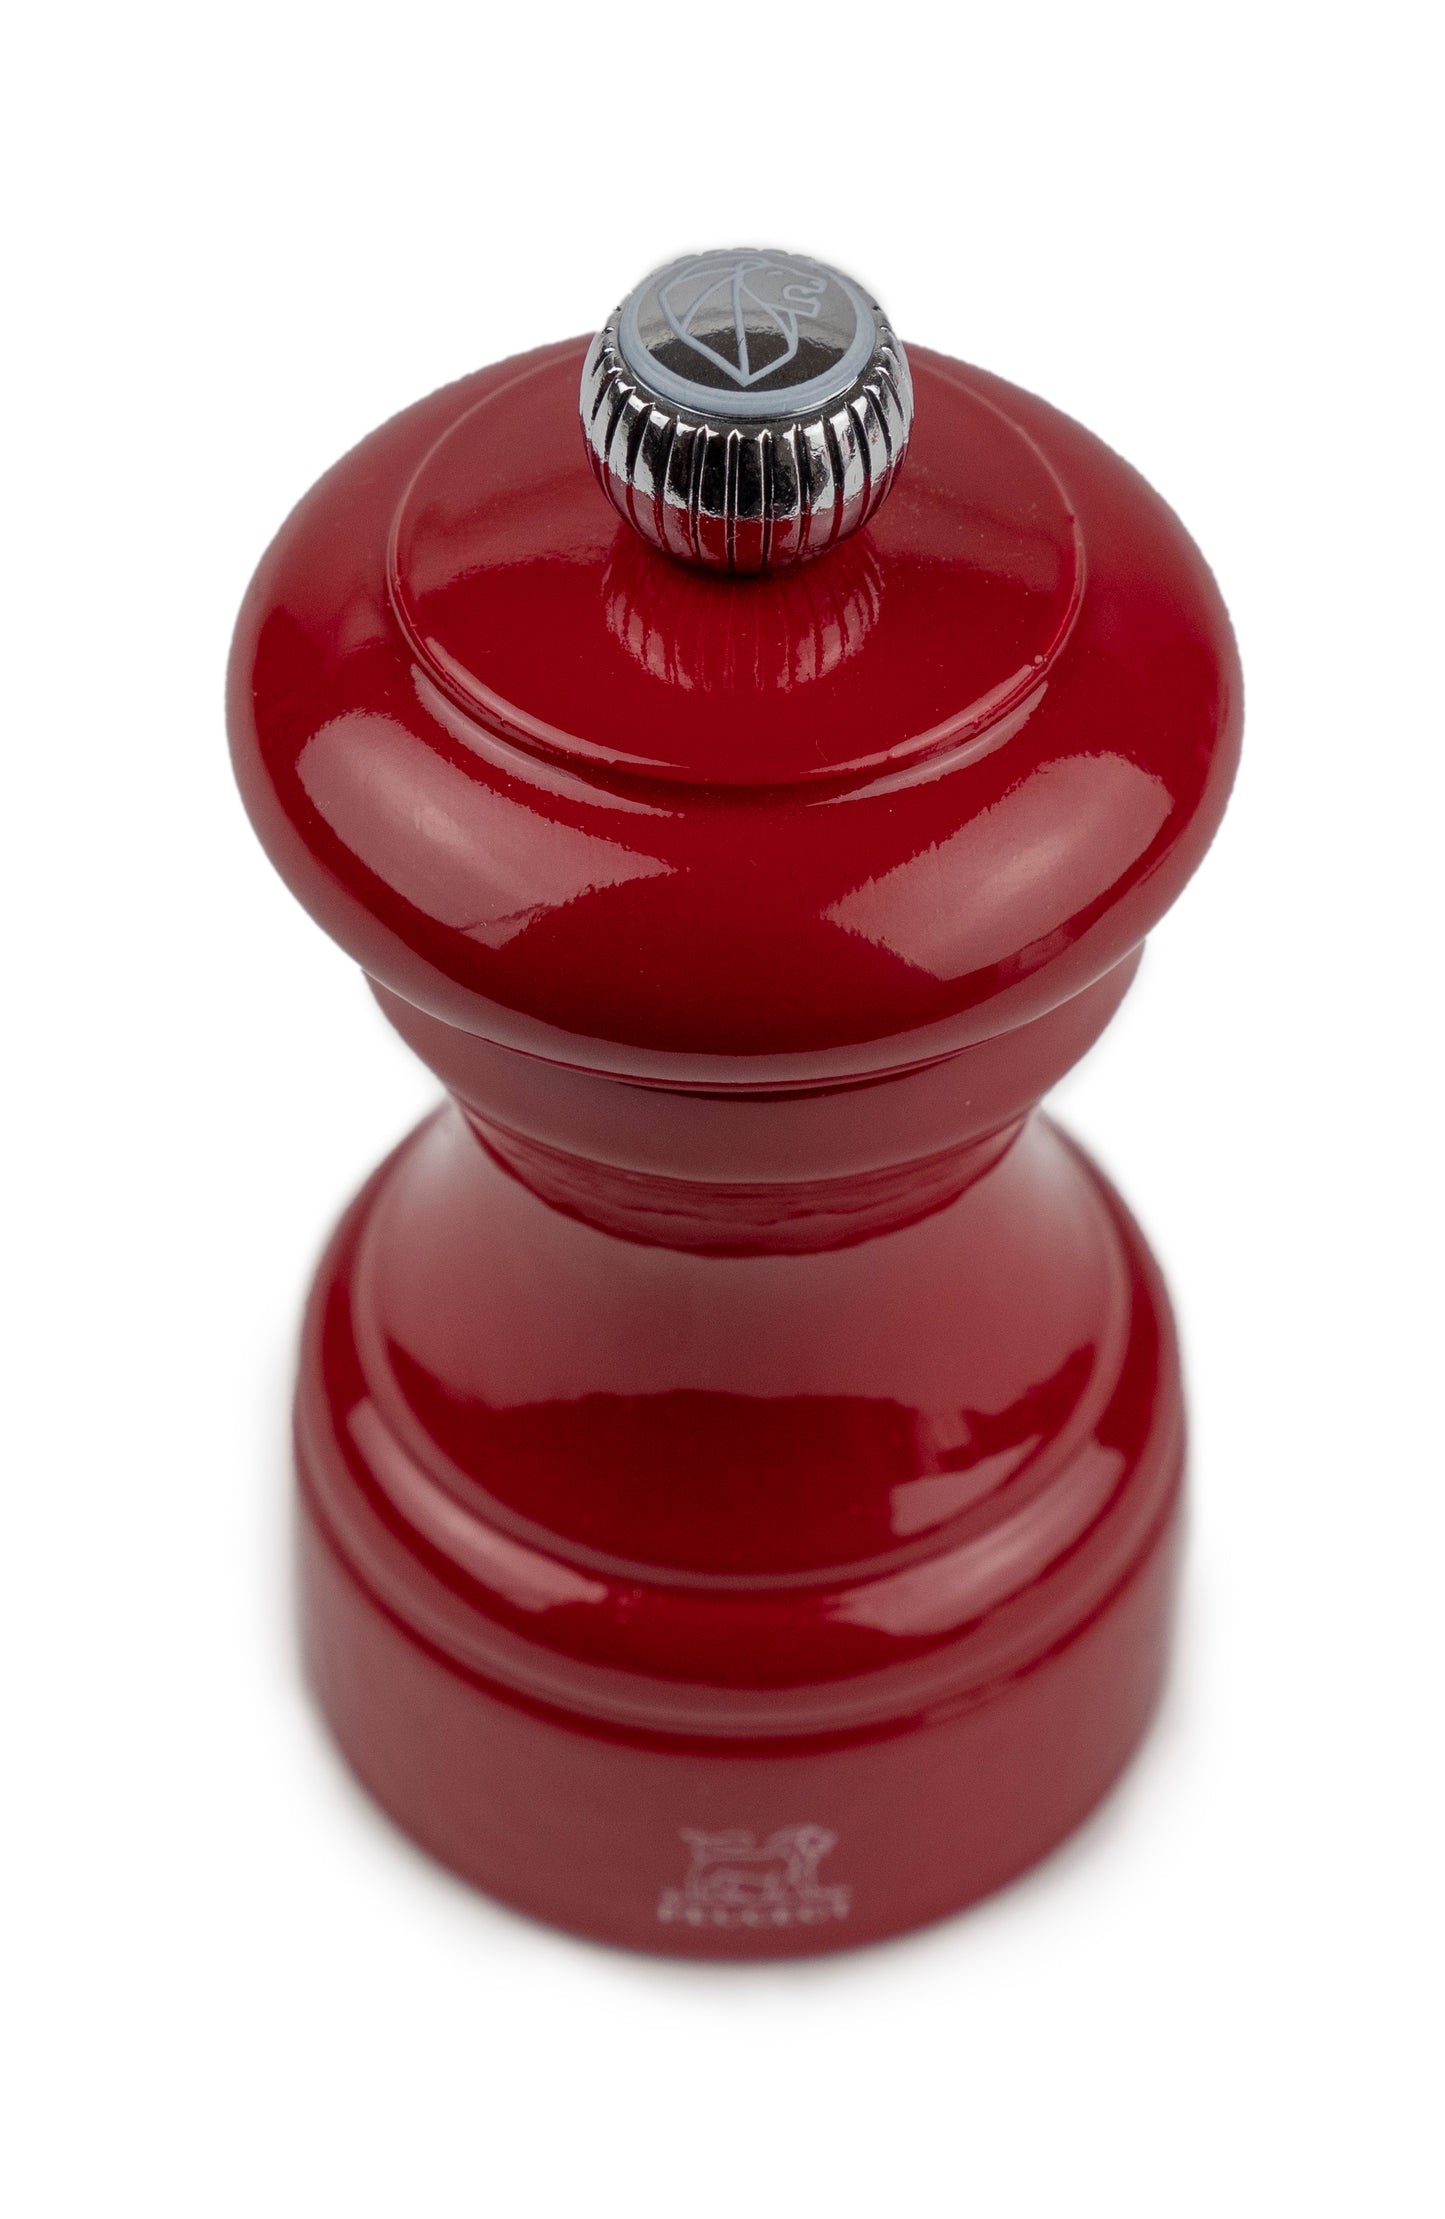 Peugeot Bistro Salt/Pepper Mill Bundle Duo in Passion Red, 10 cm